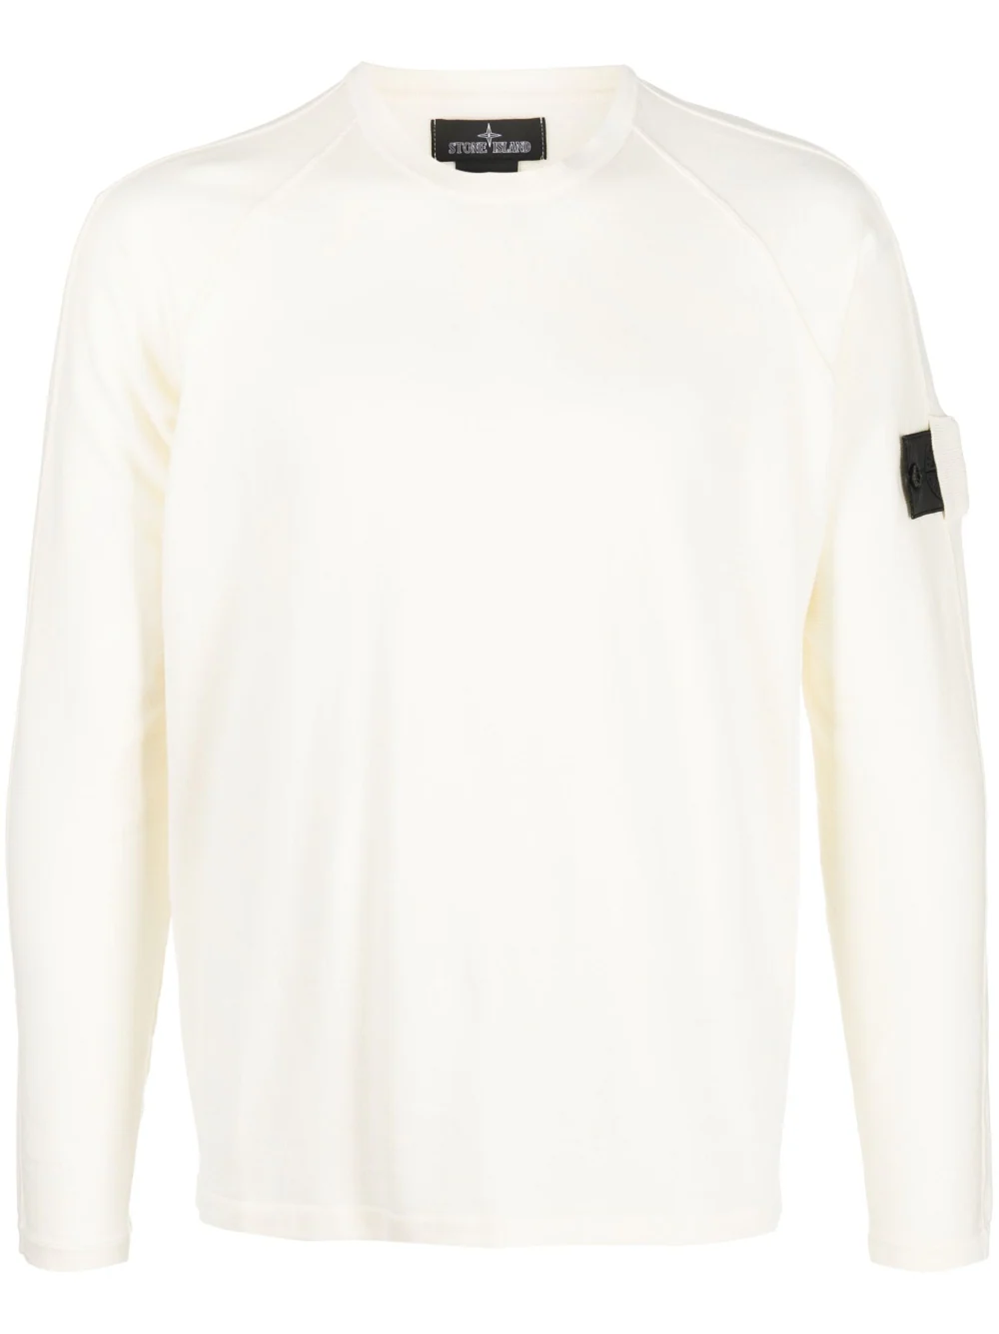 STONE ISLAND SHADOW PROJECT LONG-SLEEVED SWEATSHIRT WITH LOGO PATCH